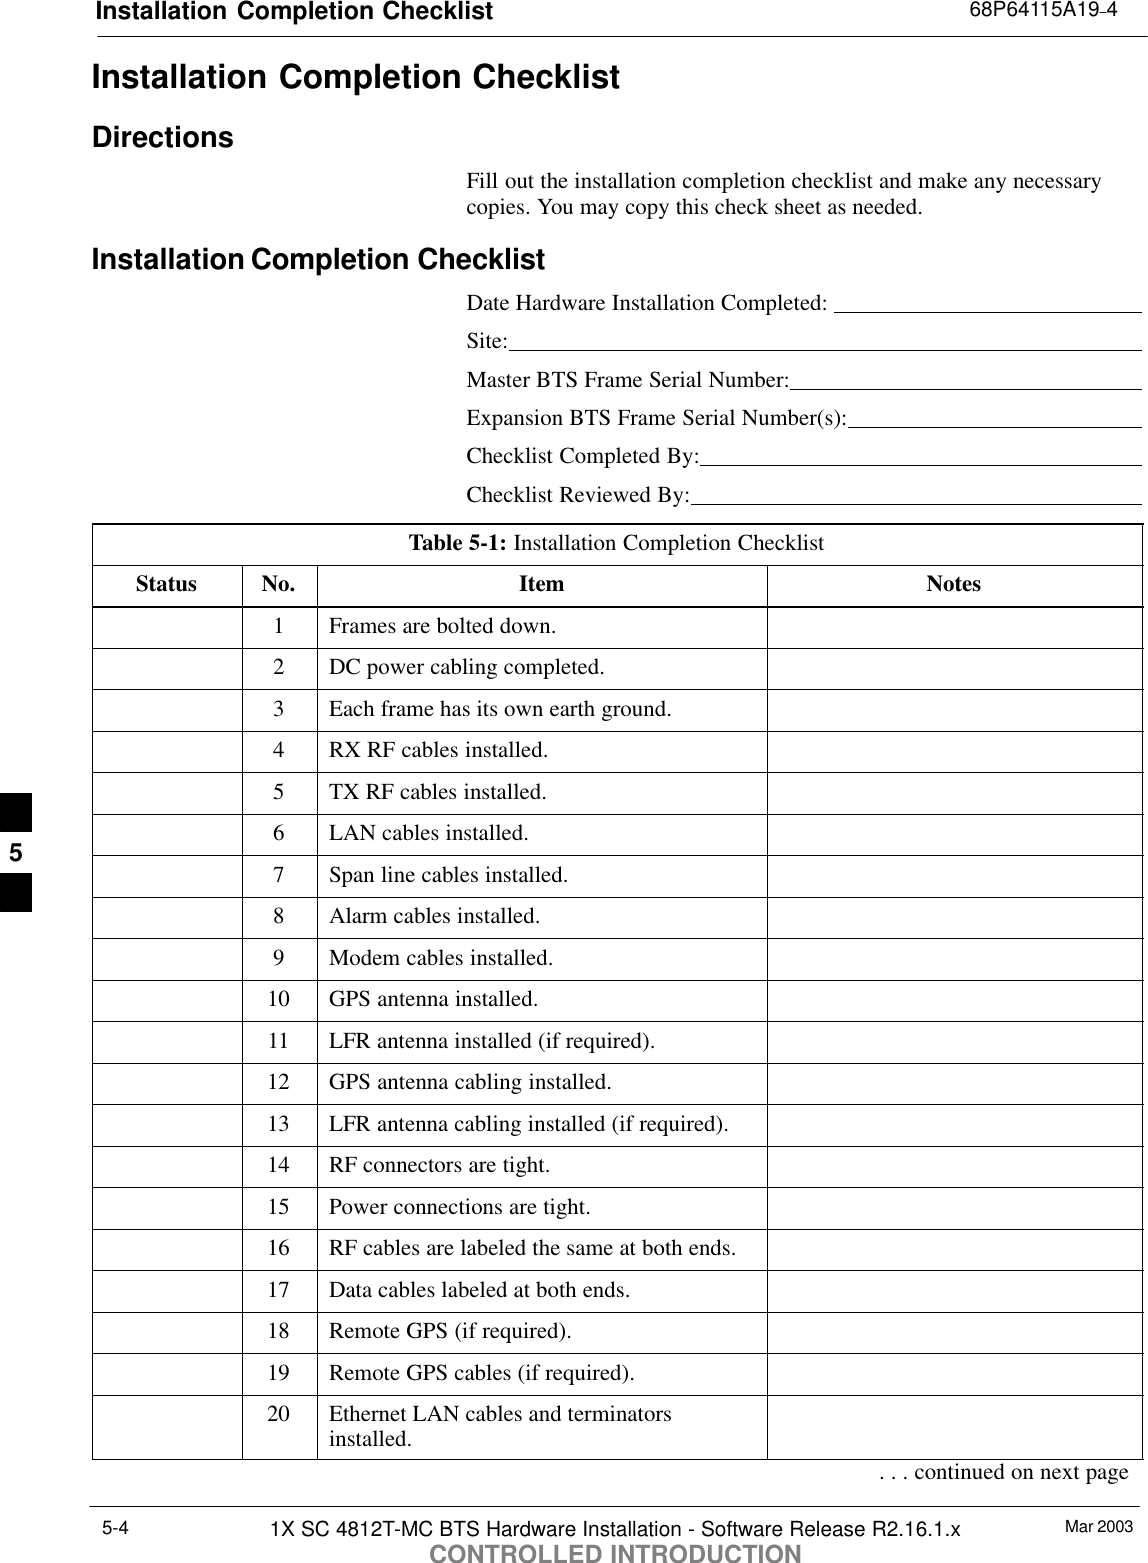 Installation Completion Checklist 68P64115A19–4Mar 20031X SC 4812T-MC BTS Hardware Installation - Software Release R2.16.1.xCONTROLLED INTRODUCTION5-4Installation Completion ChecklistDirectionsFill out the installation completion checklist and make any necessarycopies. You may copy this check sheet as needed.Installation Completion ChecklistDate Hardware Installation Completed: Site:Master BTS Frame Serial Number:Expansion BTS Frame Serial Number(s):Checklist Completed By:Checklist Reviewed By:Table 5-1: Installation Completion ChecklistStatus No. Item Notes1Frames are bolted down.2DC power cabling completed.3Each frame has its own earth ground.4RX RF cables installed.5TX RF cables installed.6LAN cables installed.7Span line cables installed.8Alarm cables installed.9Modem cables installed.10 GPS antenna installed.11 LFR antenna installed (if required).12 GPS antenna cabling installed.13 LFR antenna cabling installed (if required).14 RF connectors are tight.15 Power connections are tight.16 RF cables are labeled the same at both ends.17 Data cables labeled at both ends.18 Remote GPS (if required).19 Remote GPS cables (if required).20 Ethernet LAN cables and terminatorsinstalled.. . . continued on next page5